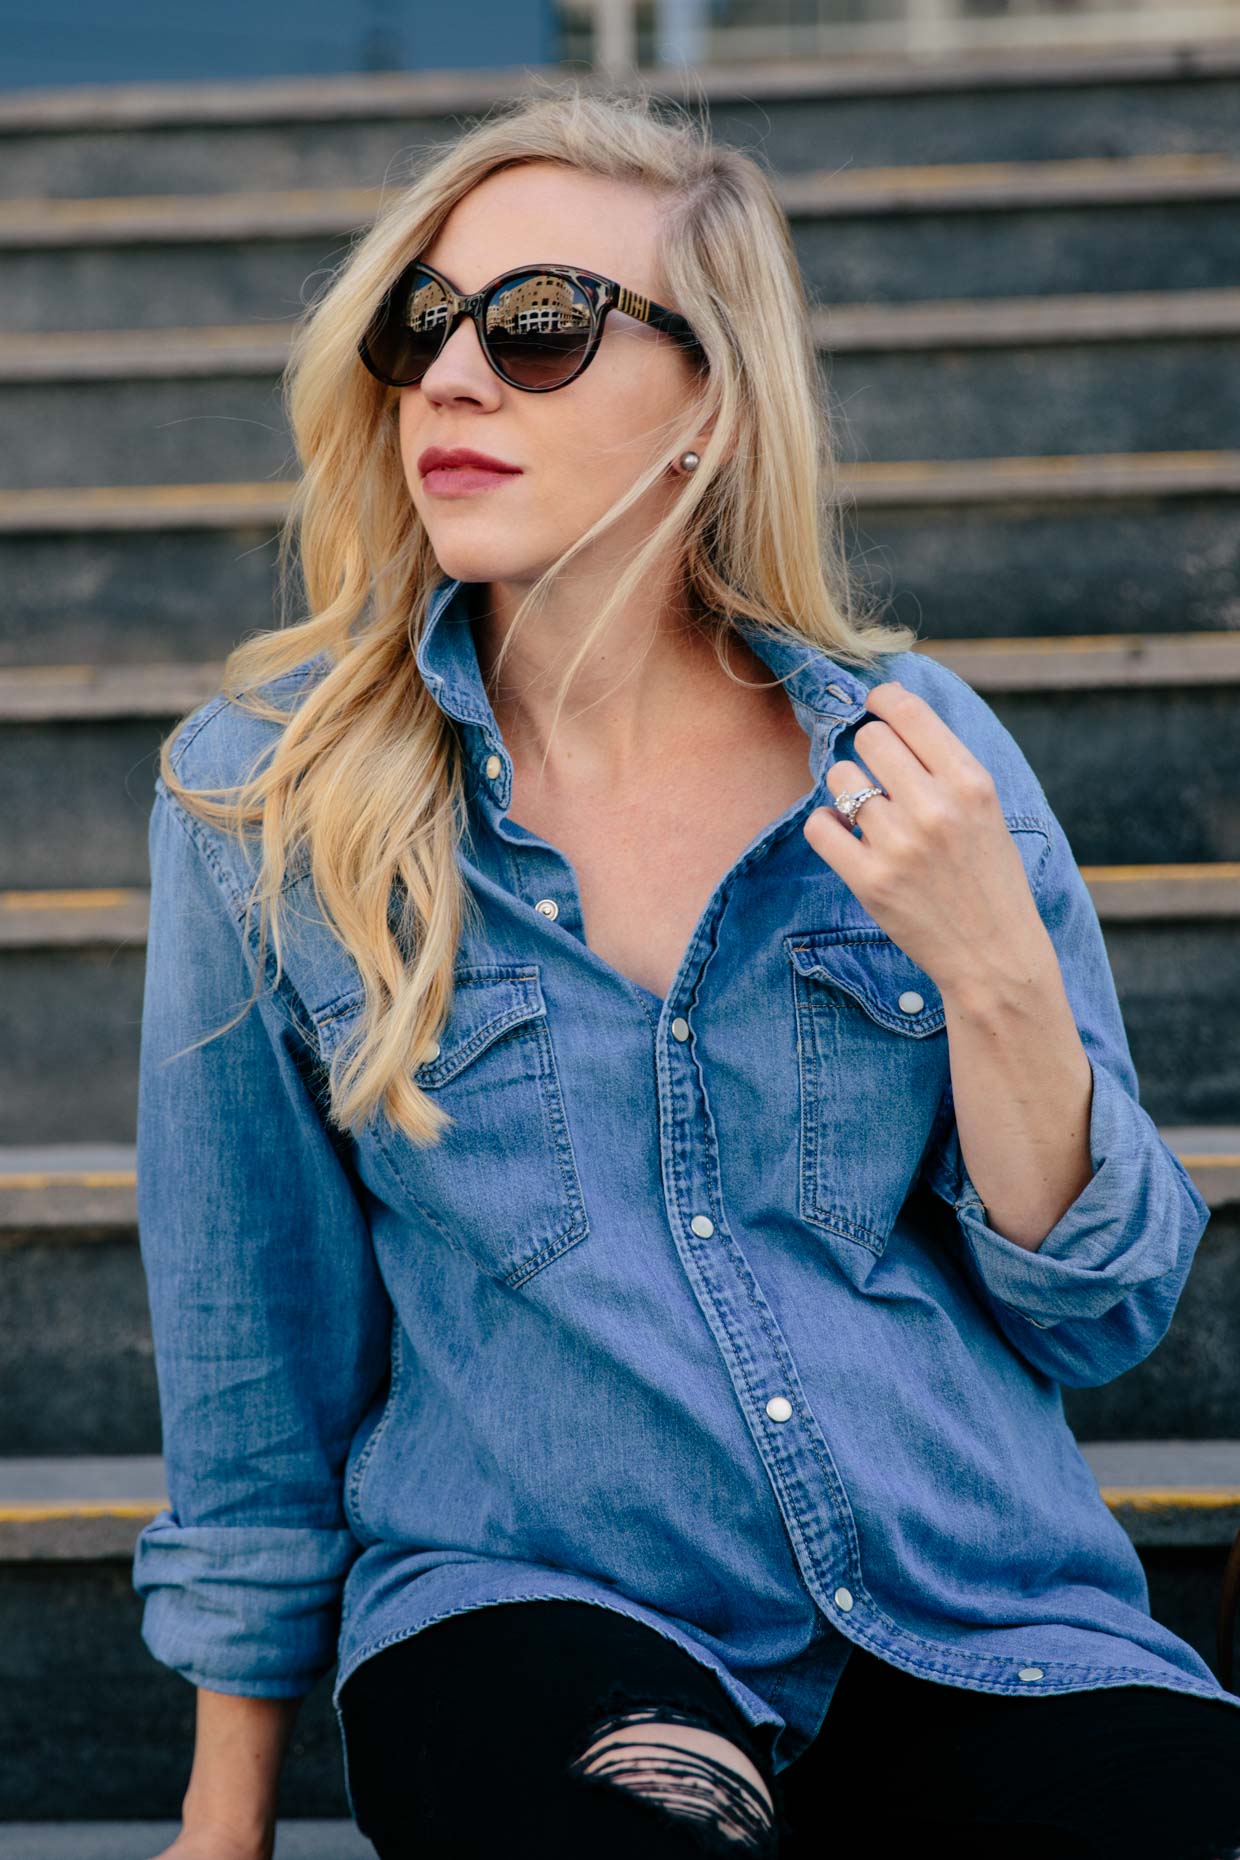 Western Meets Edgy: Oversized Denim Shirt with Black Jeans & Suede